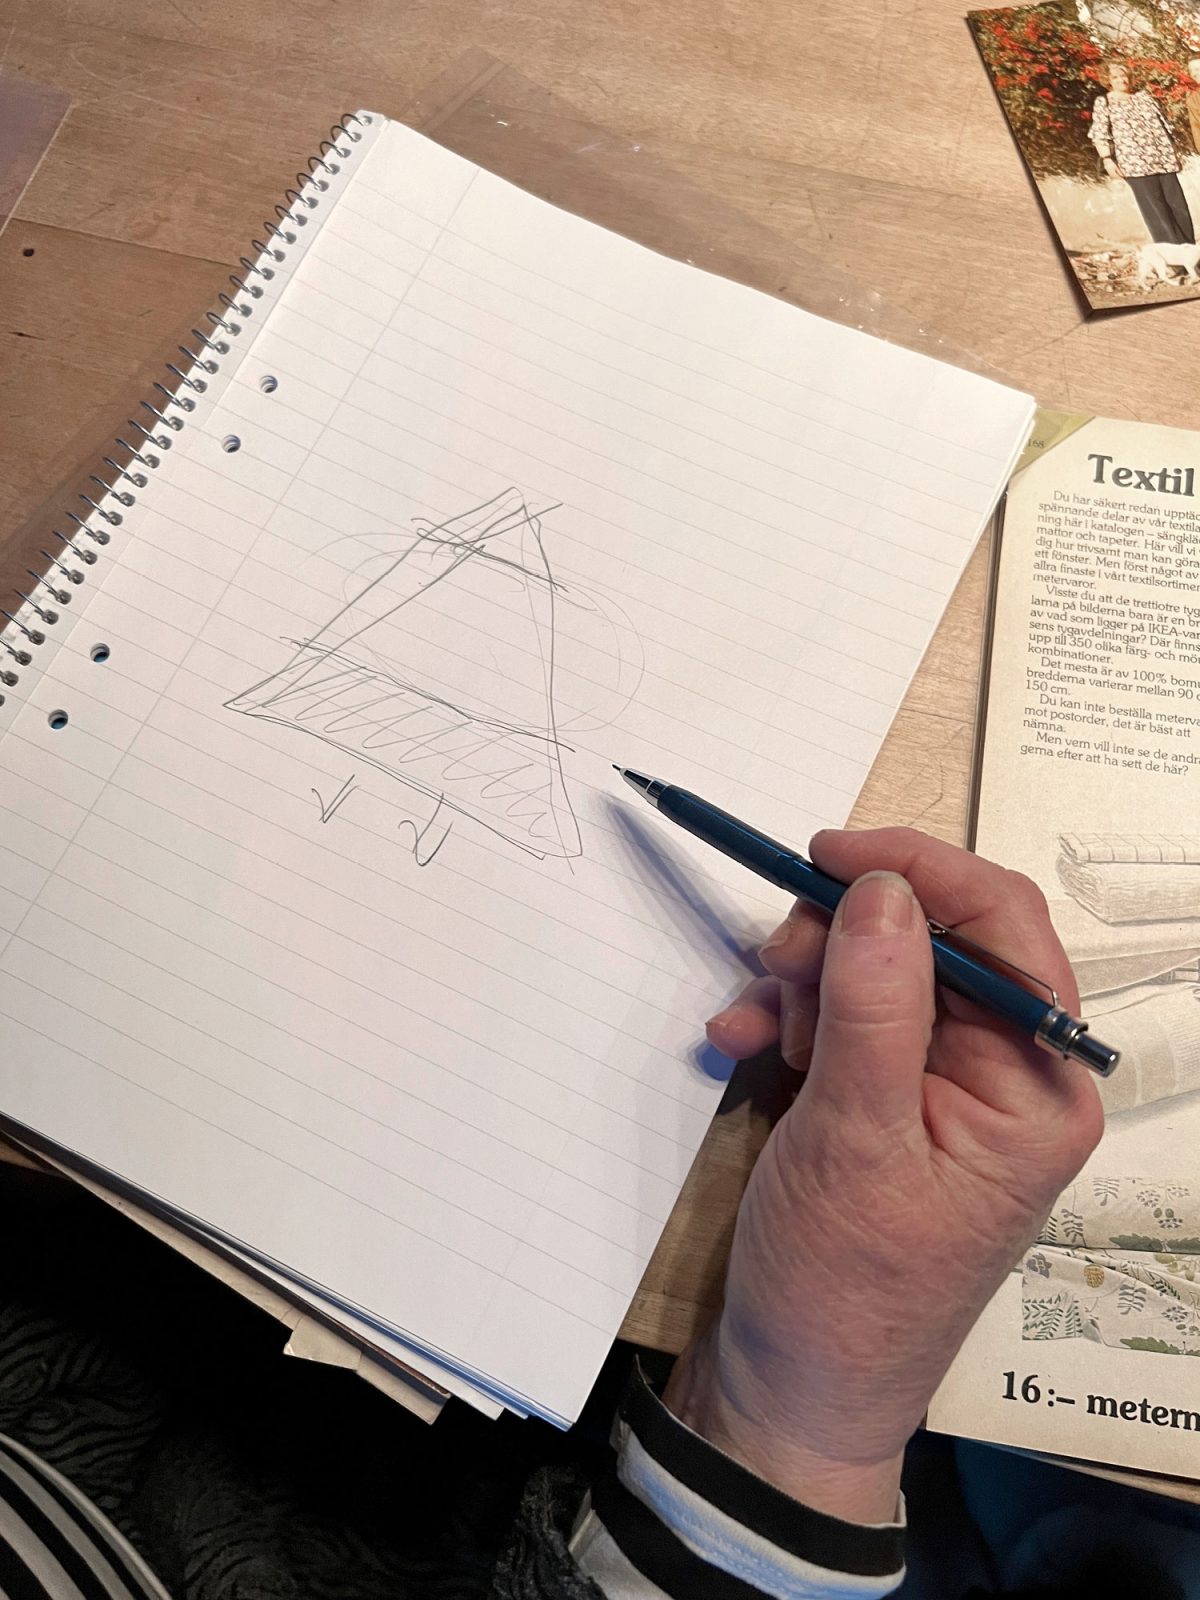 Close-up of a woman's hand sketching a triangular diagram in a notebook.